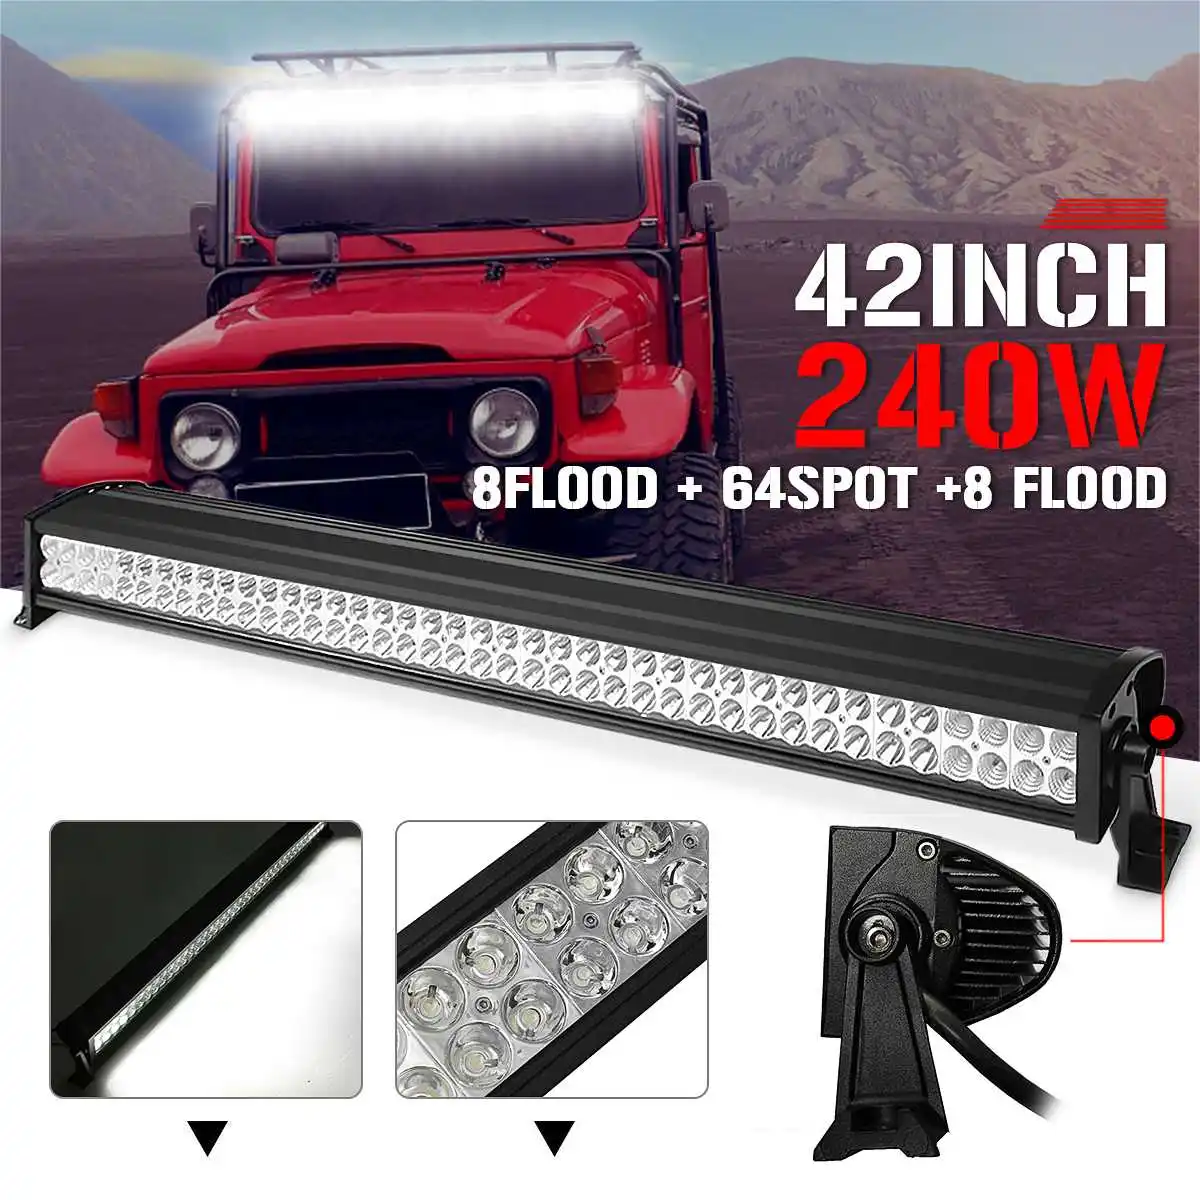 

42" 240W Car LED Bar Roof Work Light Bar Warning Light Lamp For Jeep Tractor Boat OffRoad Off Road 4WD 4x4 Truck SUV Trailer